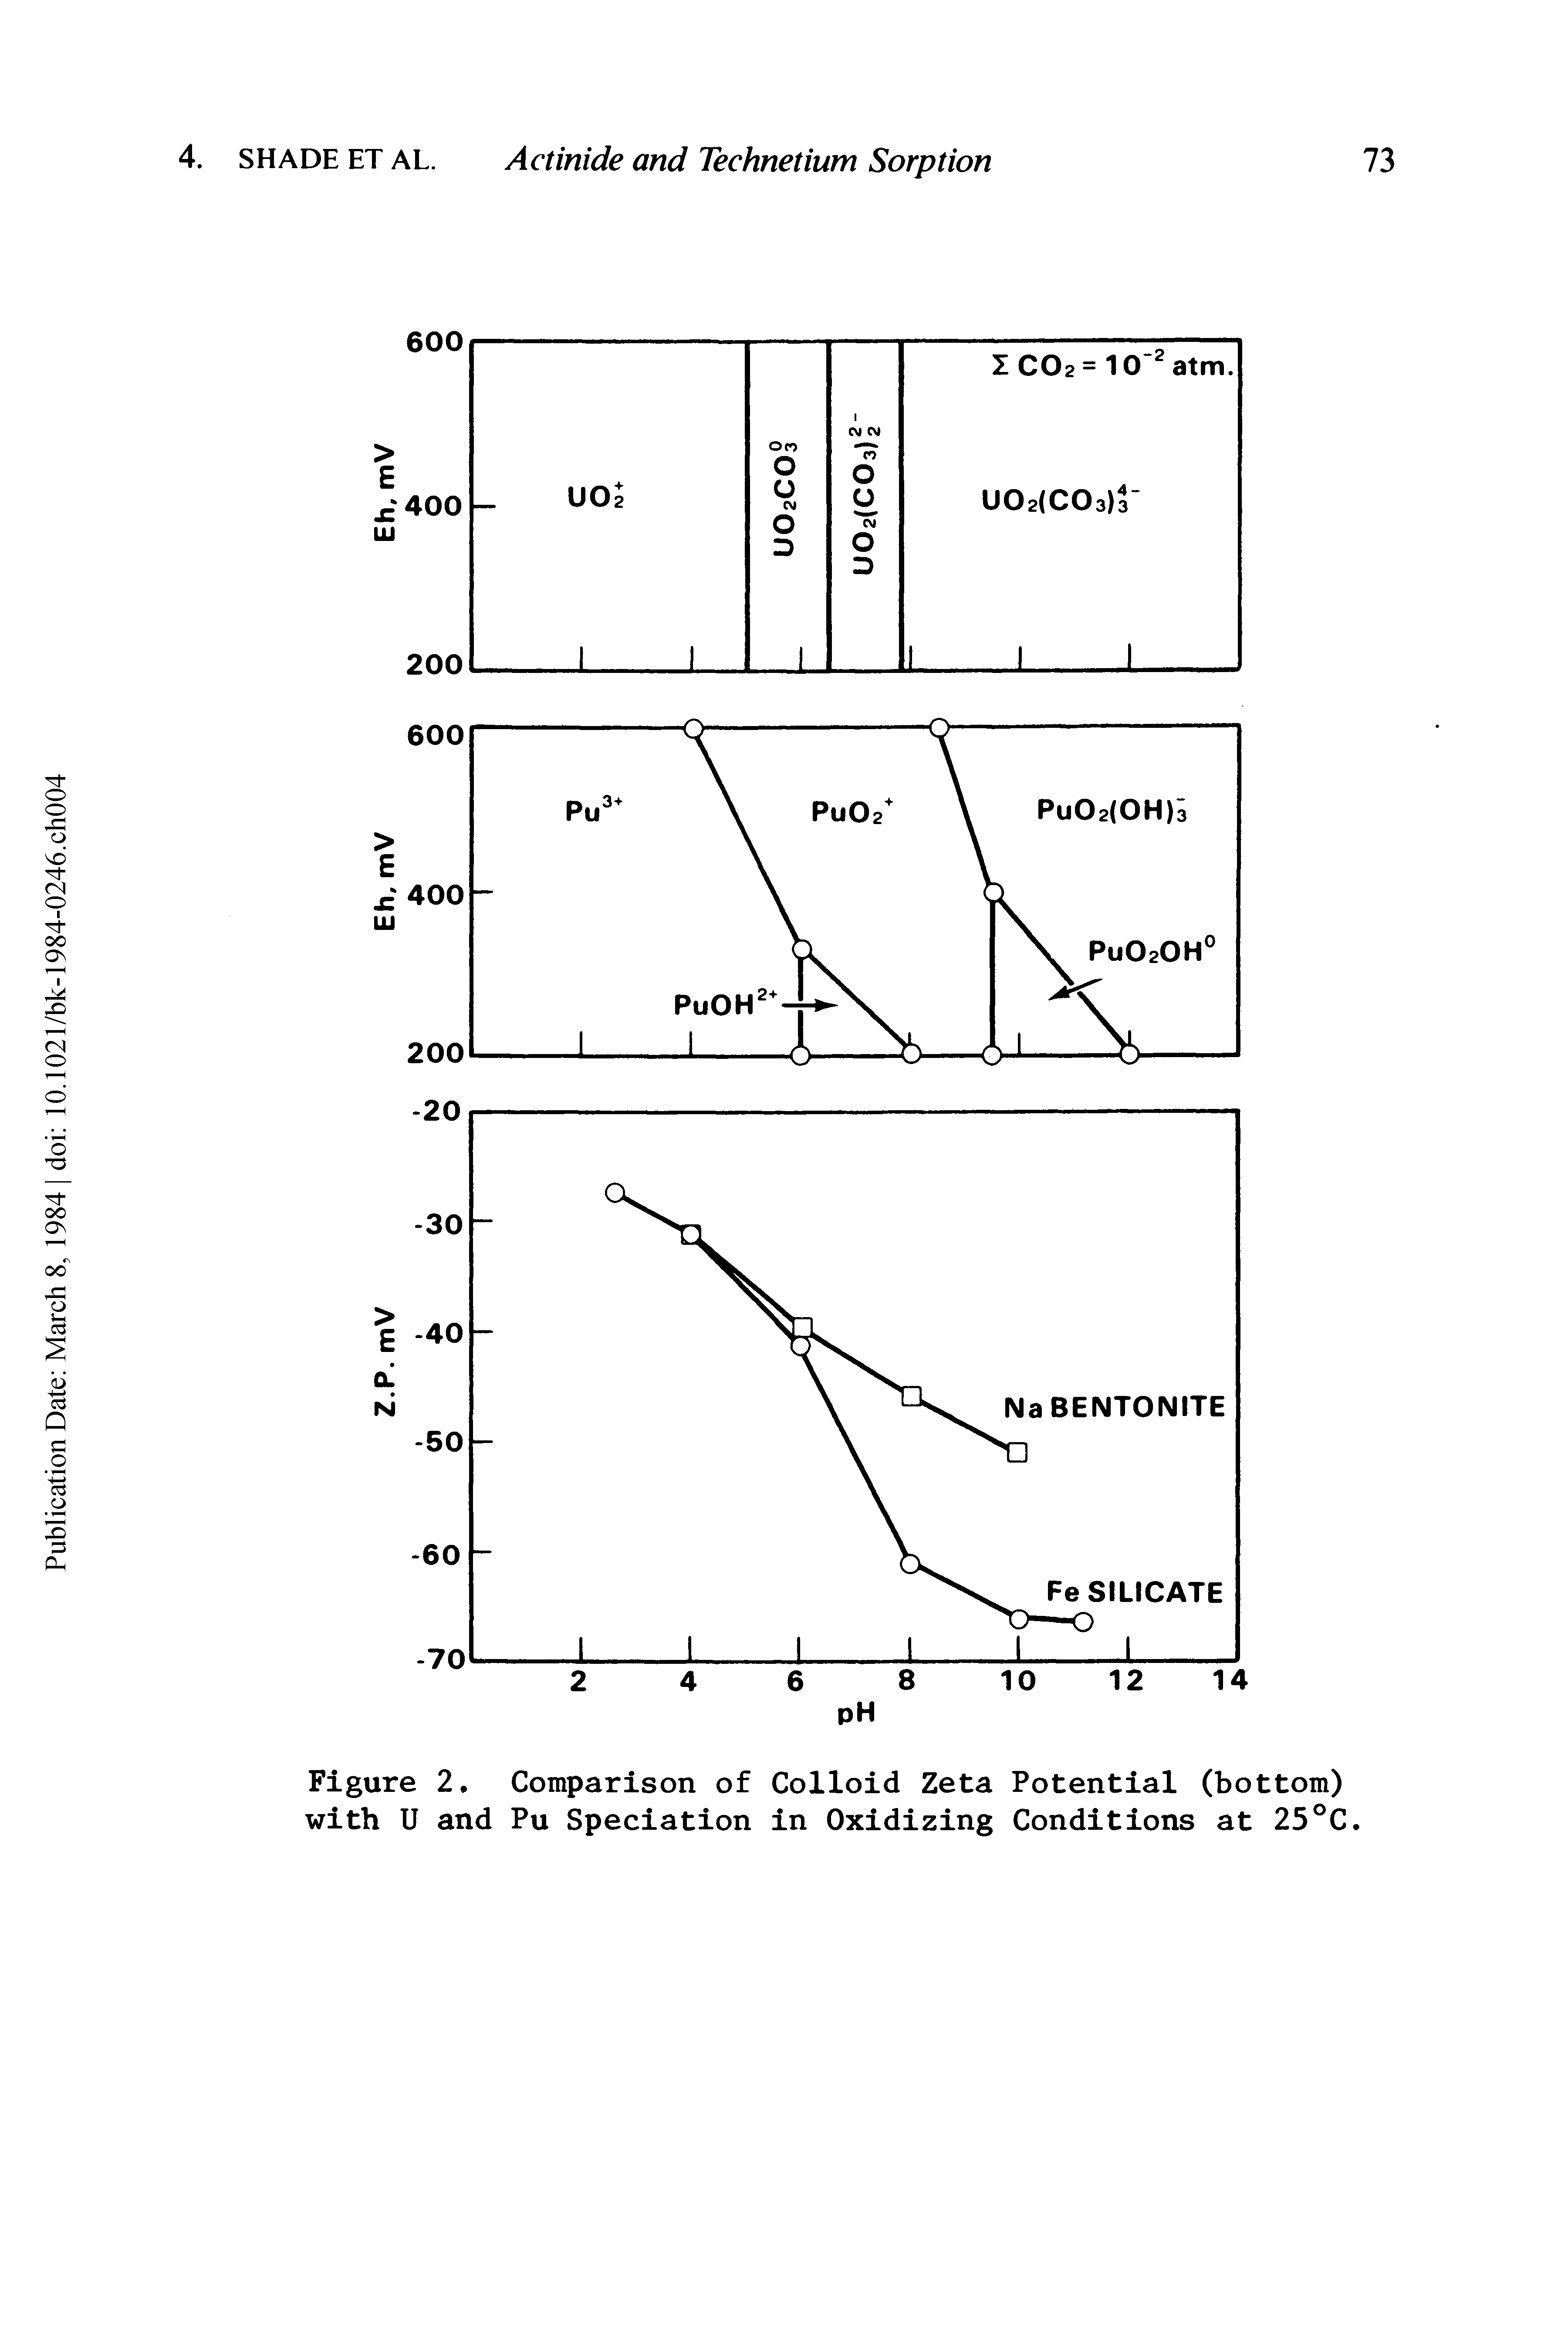 Figure 2. Comparison of Colloid Zeta Potential (bottom) with U and Pu Speciation in Oxidizing Conditions at 25°C.